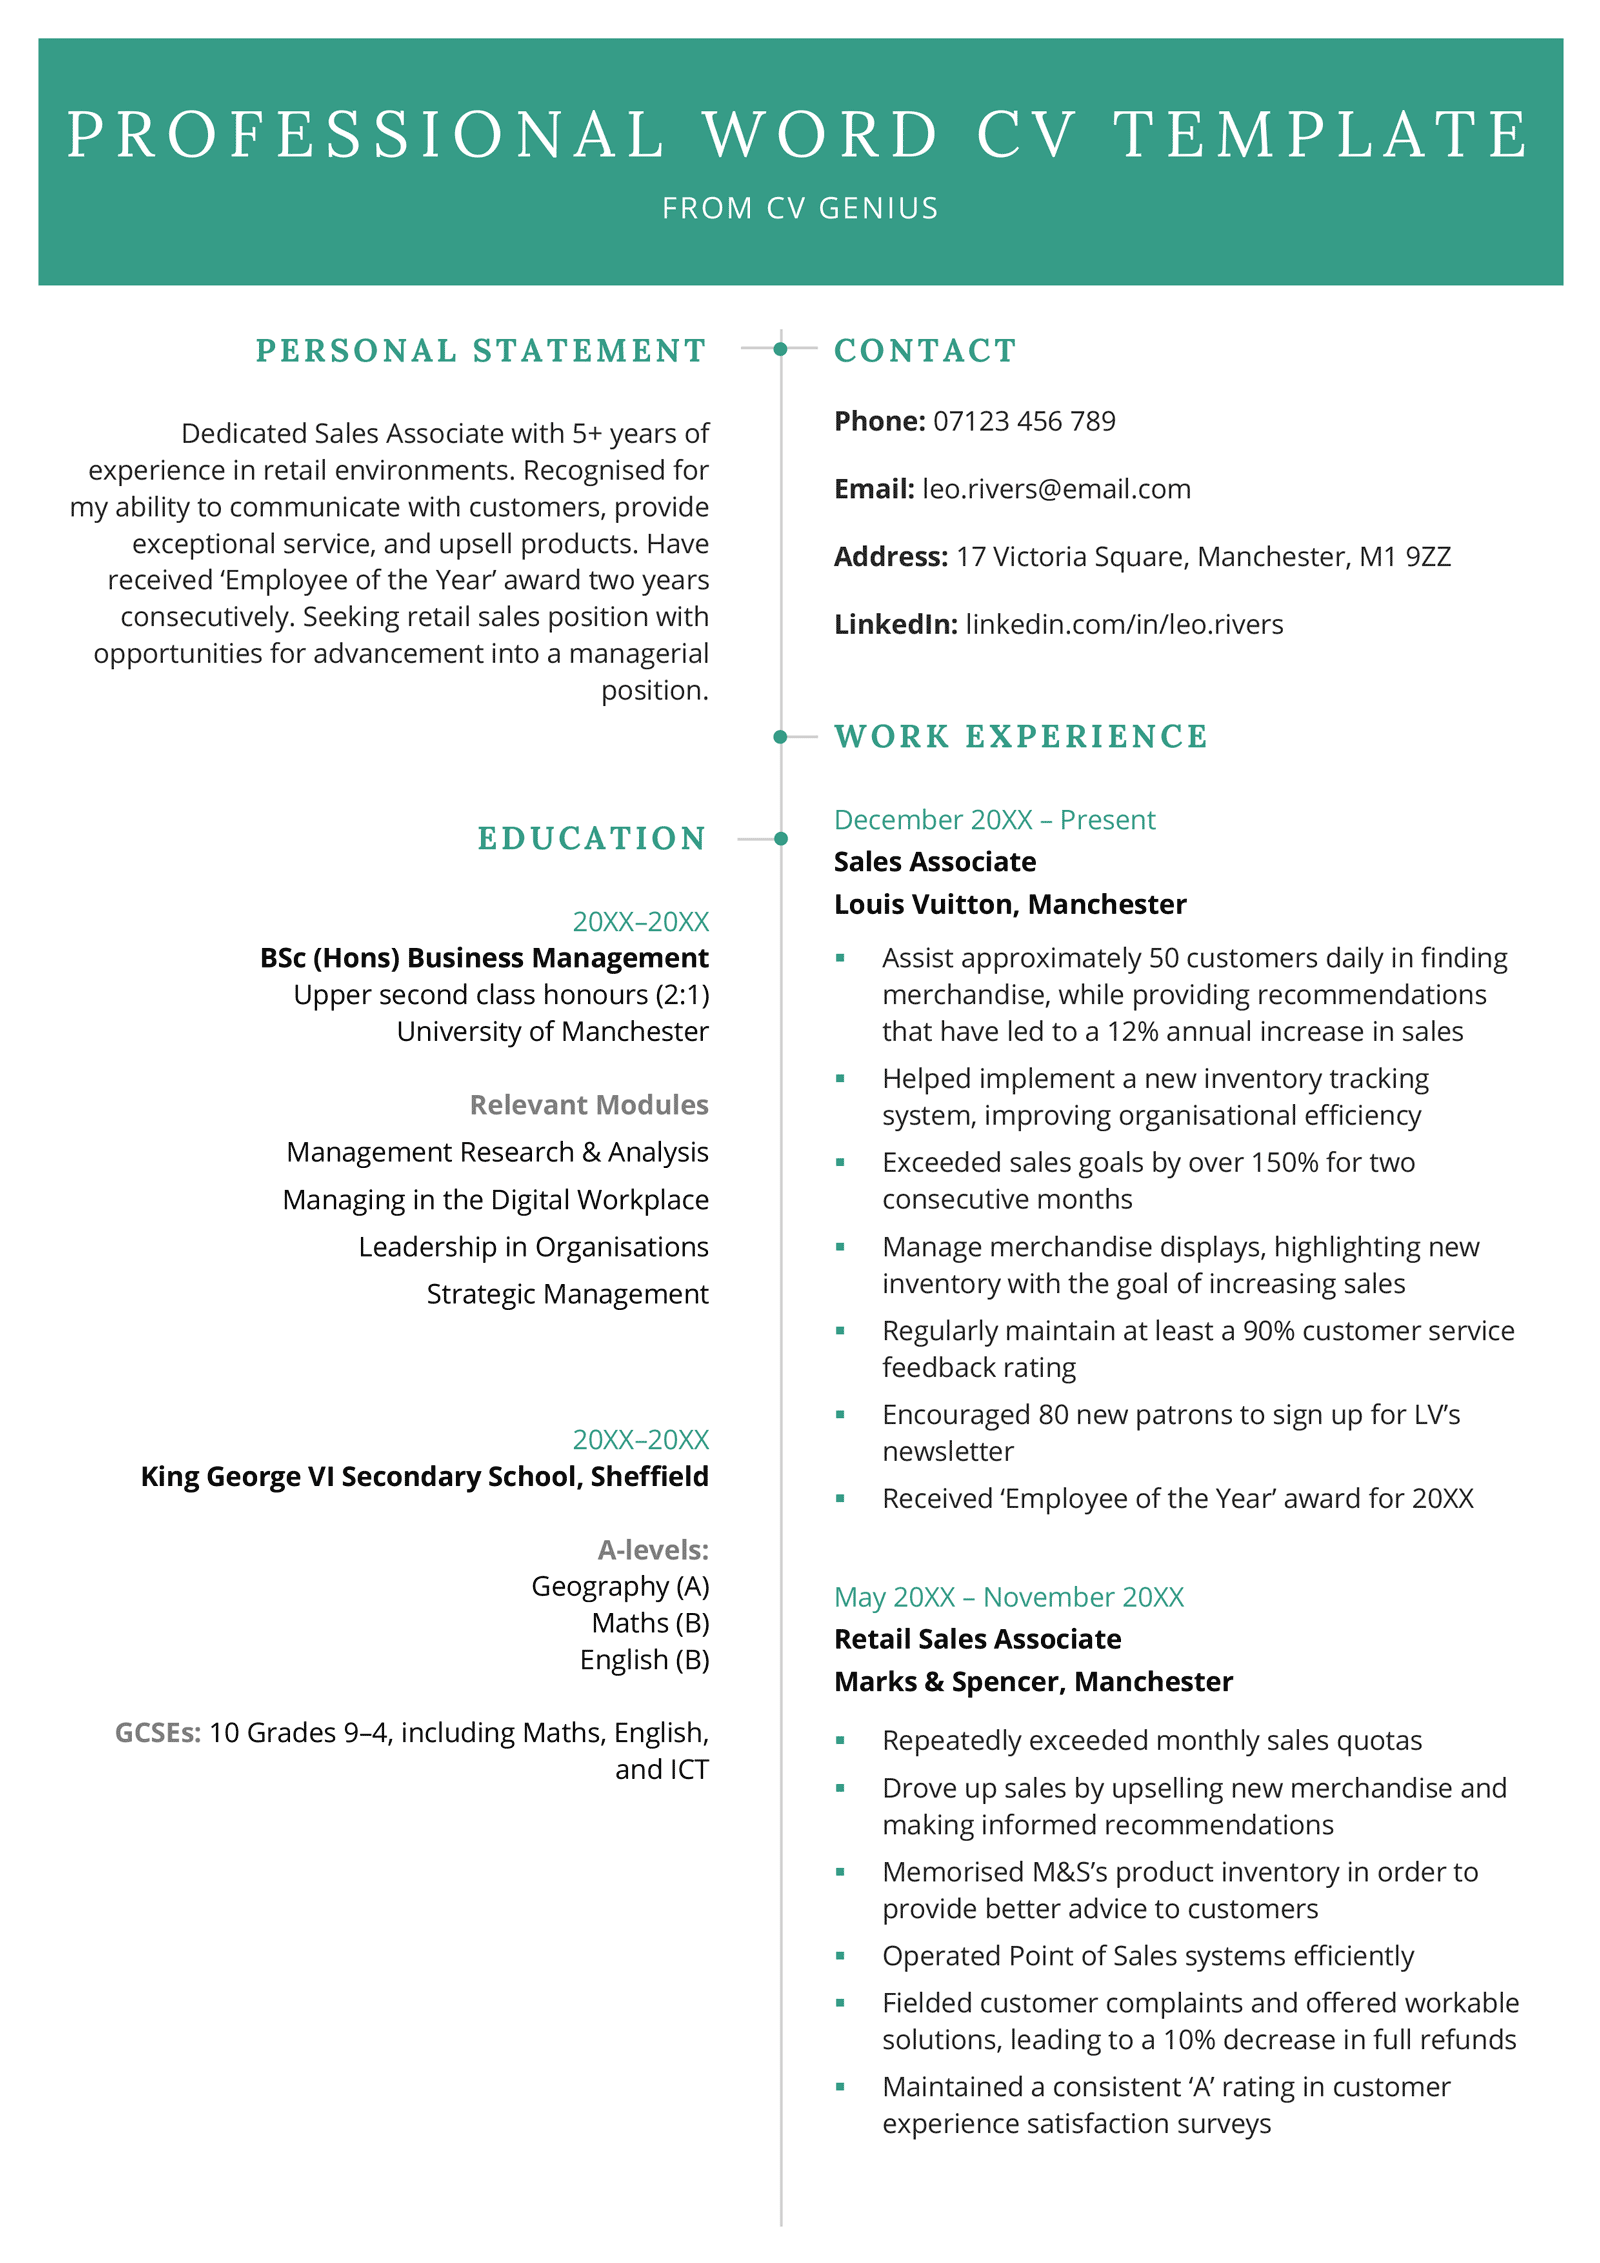 A professional CV template for free Word download that features a prominent name header that's sure to catch the recruiting manager's eye.